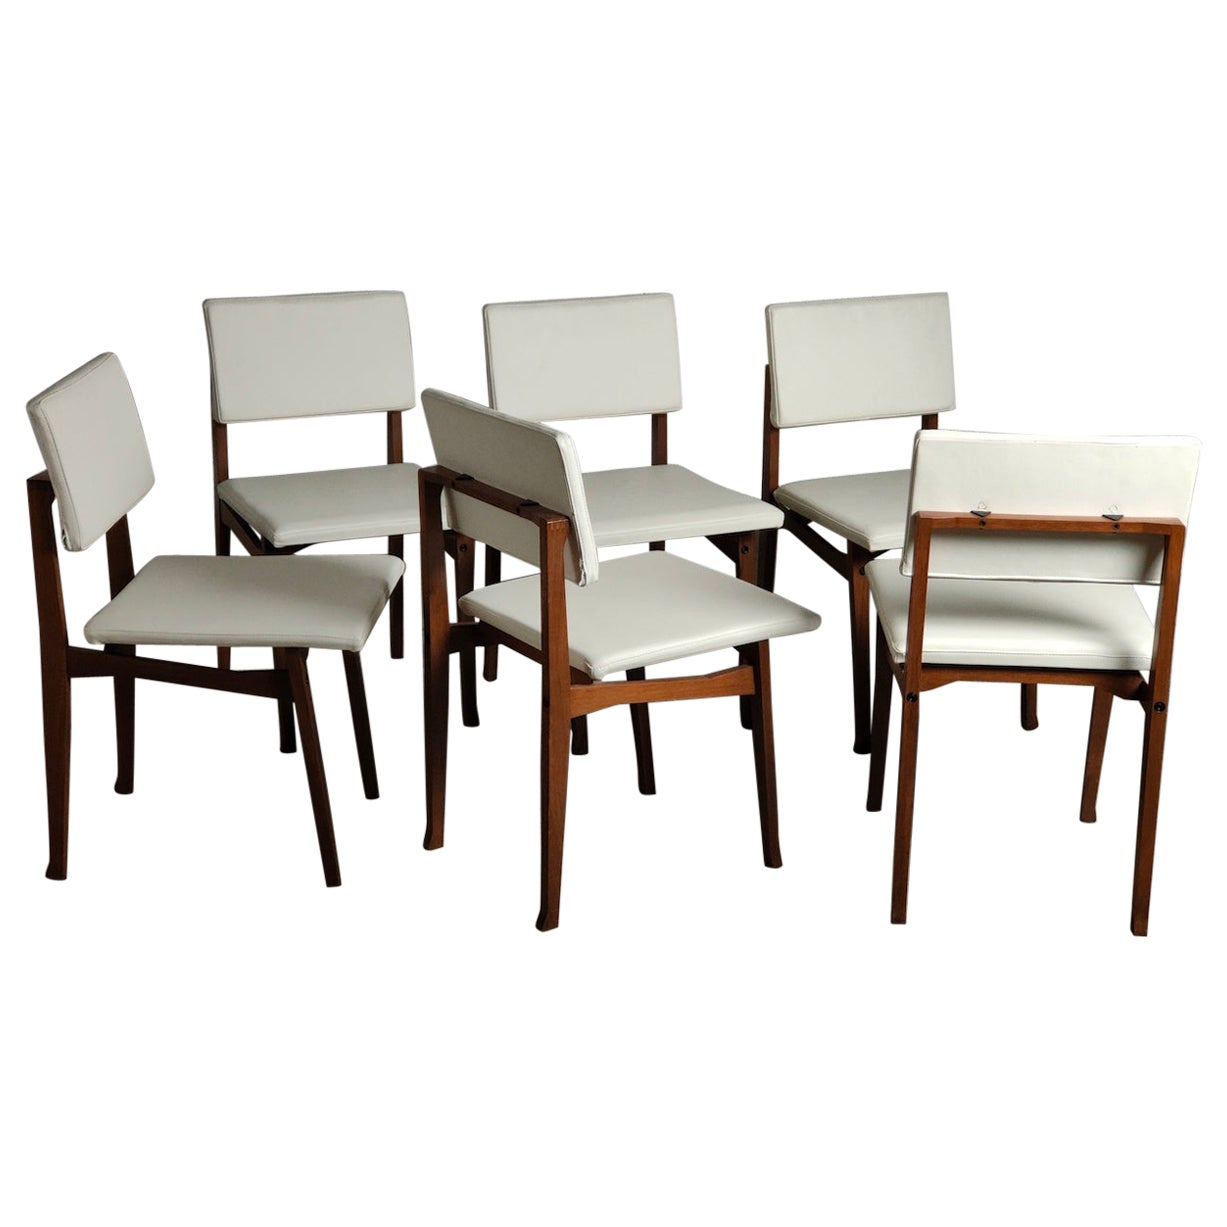 Set of 6 SD9 "Luisella" Chairs by Franco Albini for Poggi, Italy, 60's